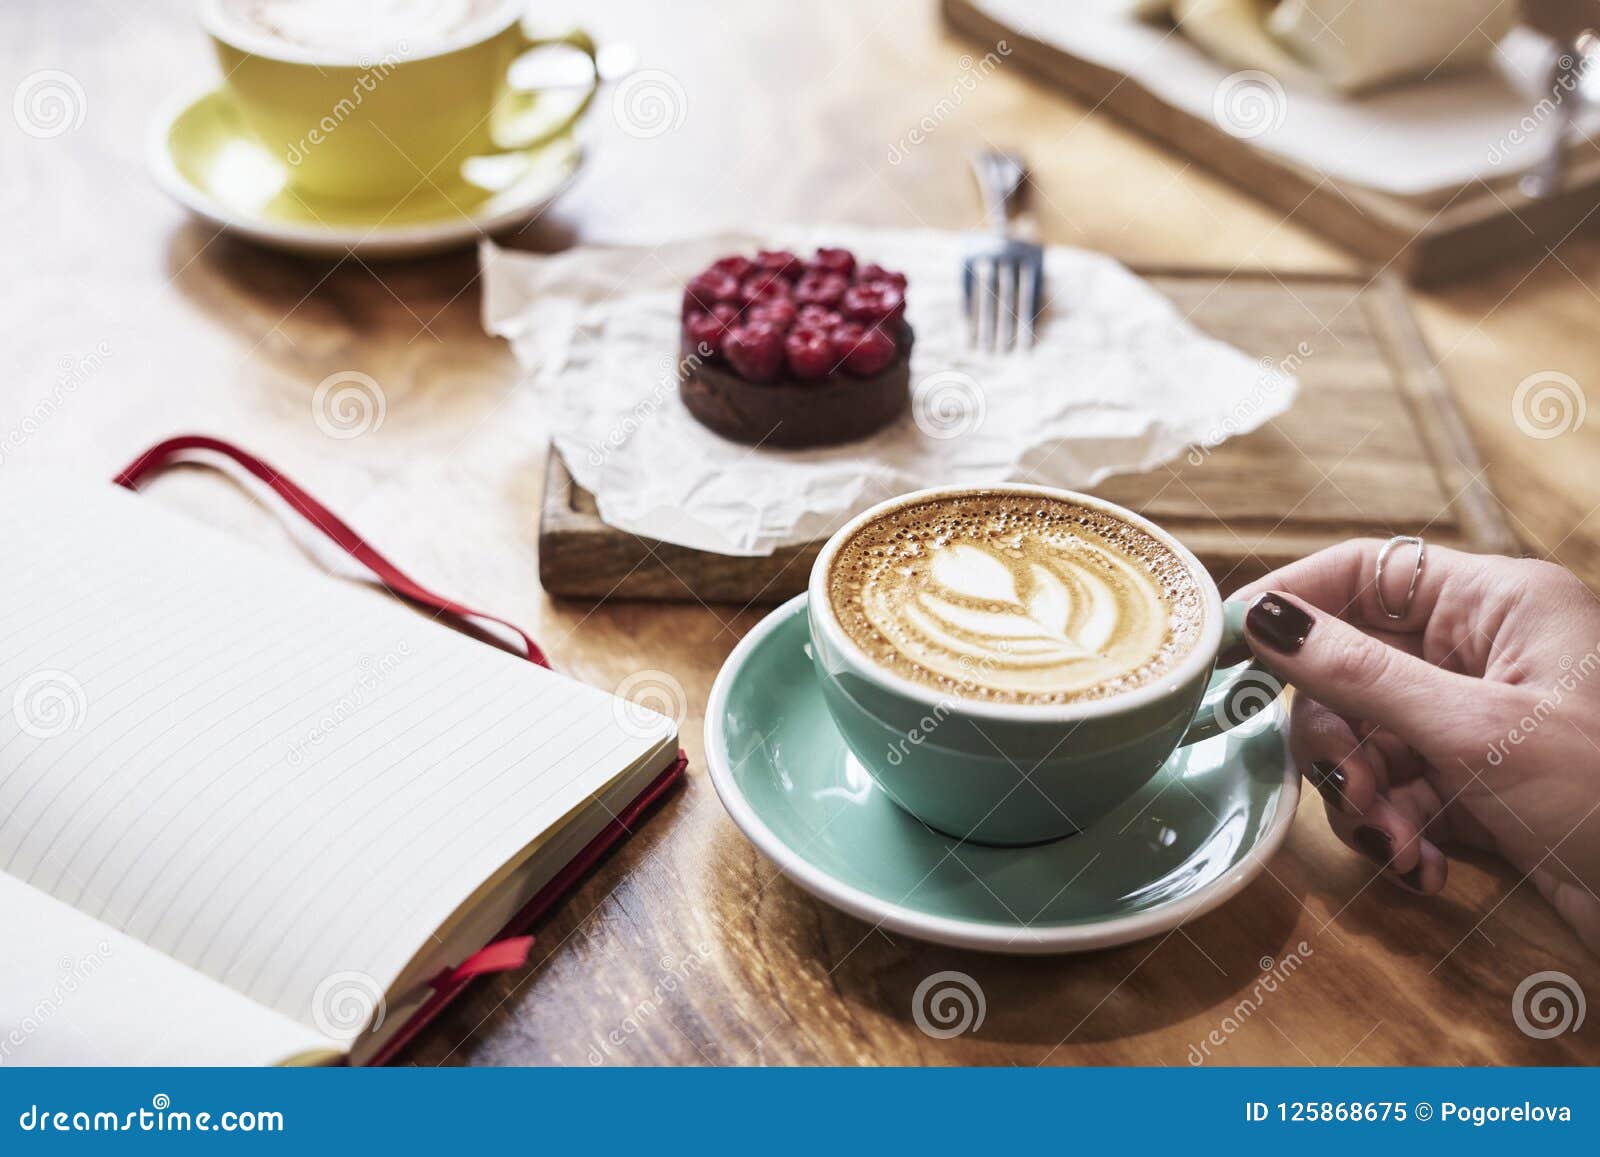 having lunch with coffee flat white and sweet chocolate cookie in a cafe or restaurant. woman hand holds a green cup.